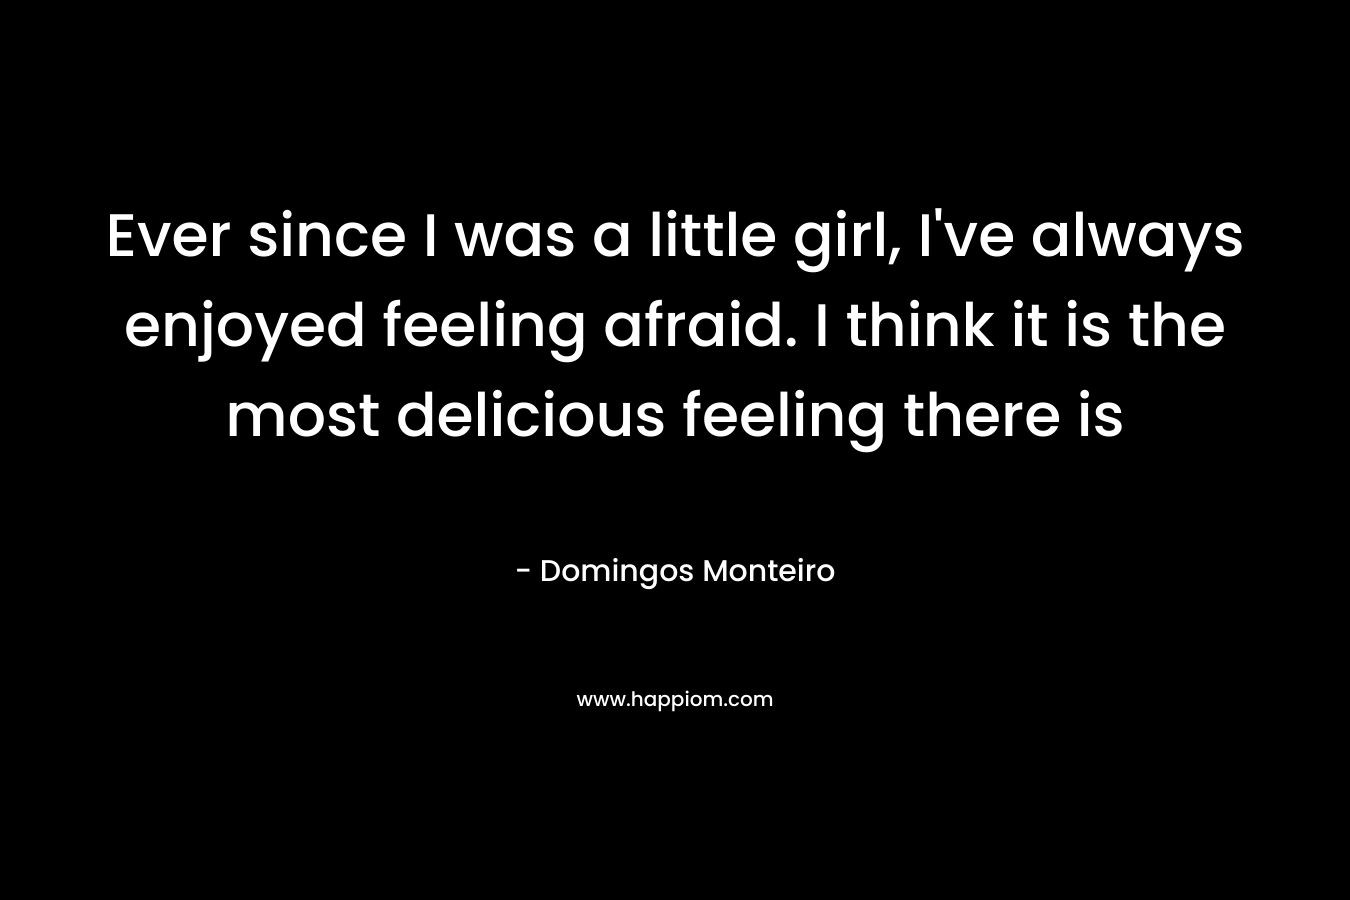 Ever since I was a little girl, I've always enjoyed feeling afraid. I think it is the most delicious feeling there is